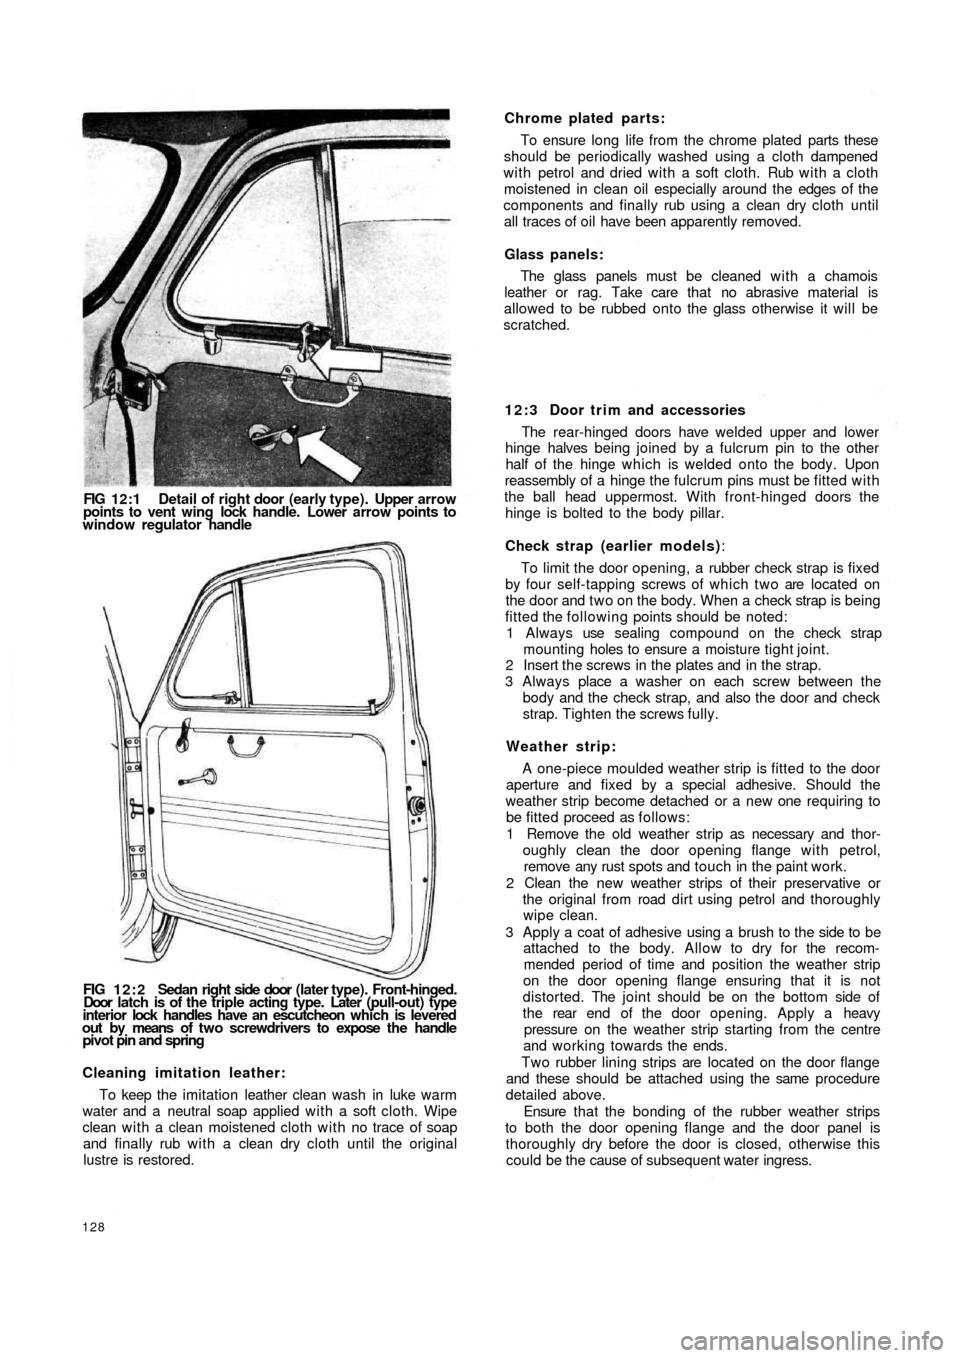 FIAT 500 1964 1.G Workshop Manual FIG 12:1 Detail of right door (early type). Upper arrow
points to  vent wing lock  handle. Lower arrow points to
window regulator handle
FIG  1 2 : 2   Sedan  right  side  door  (later type). Front-hi